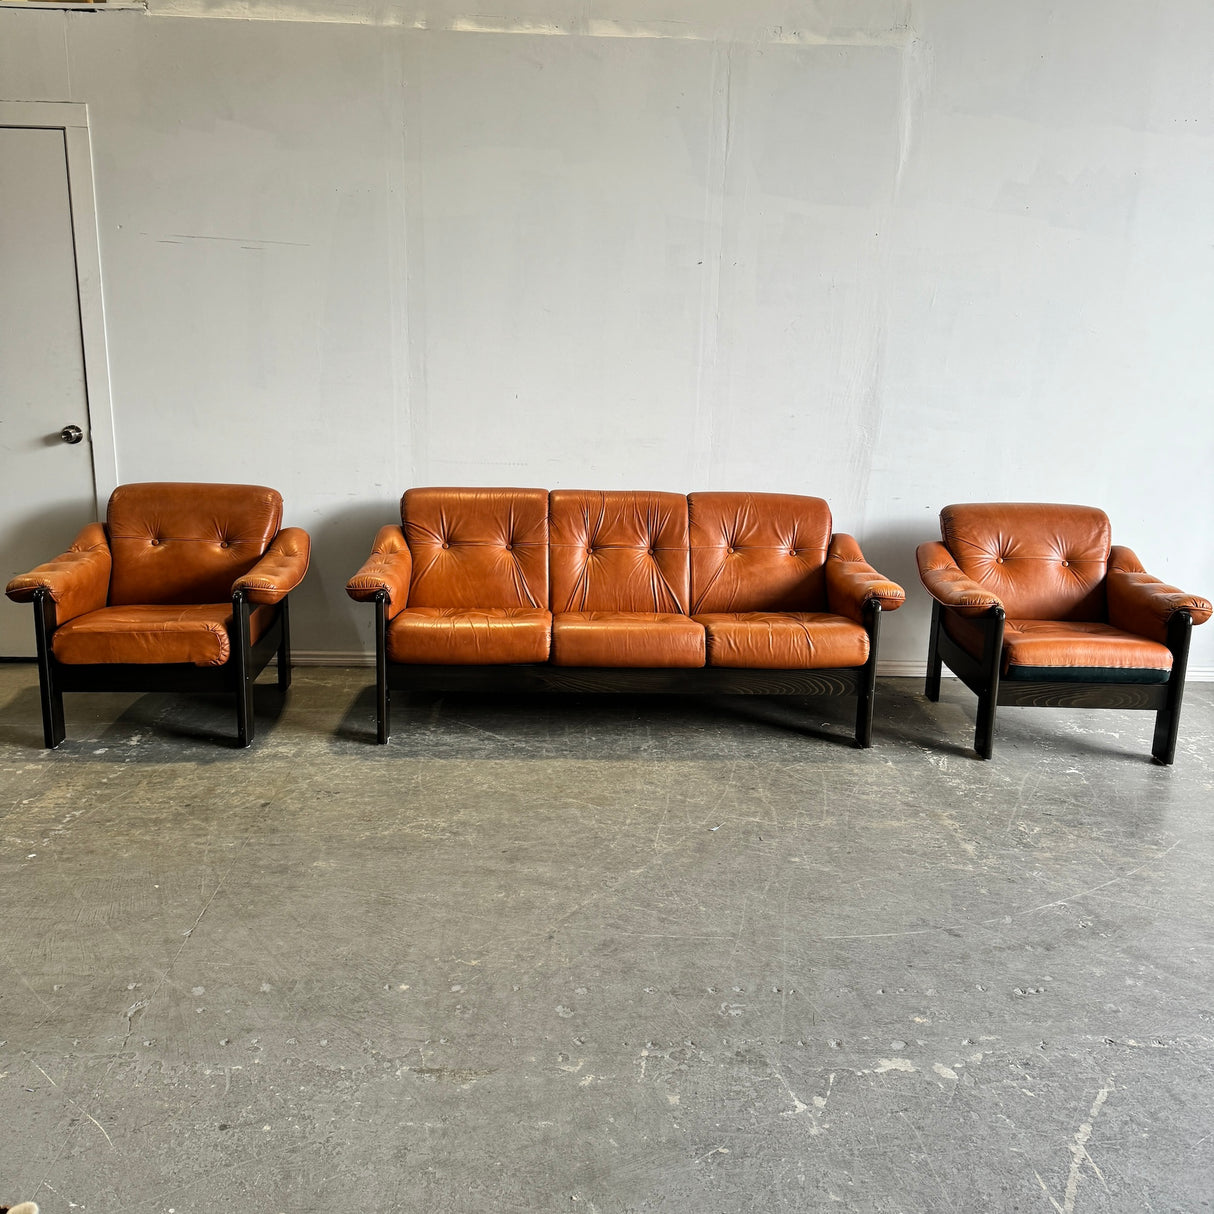 Vintage Swedish Sofa with two matching lounge chairs